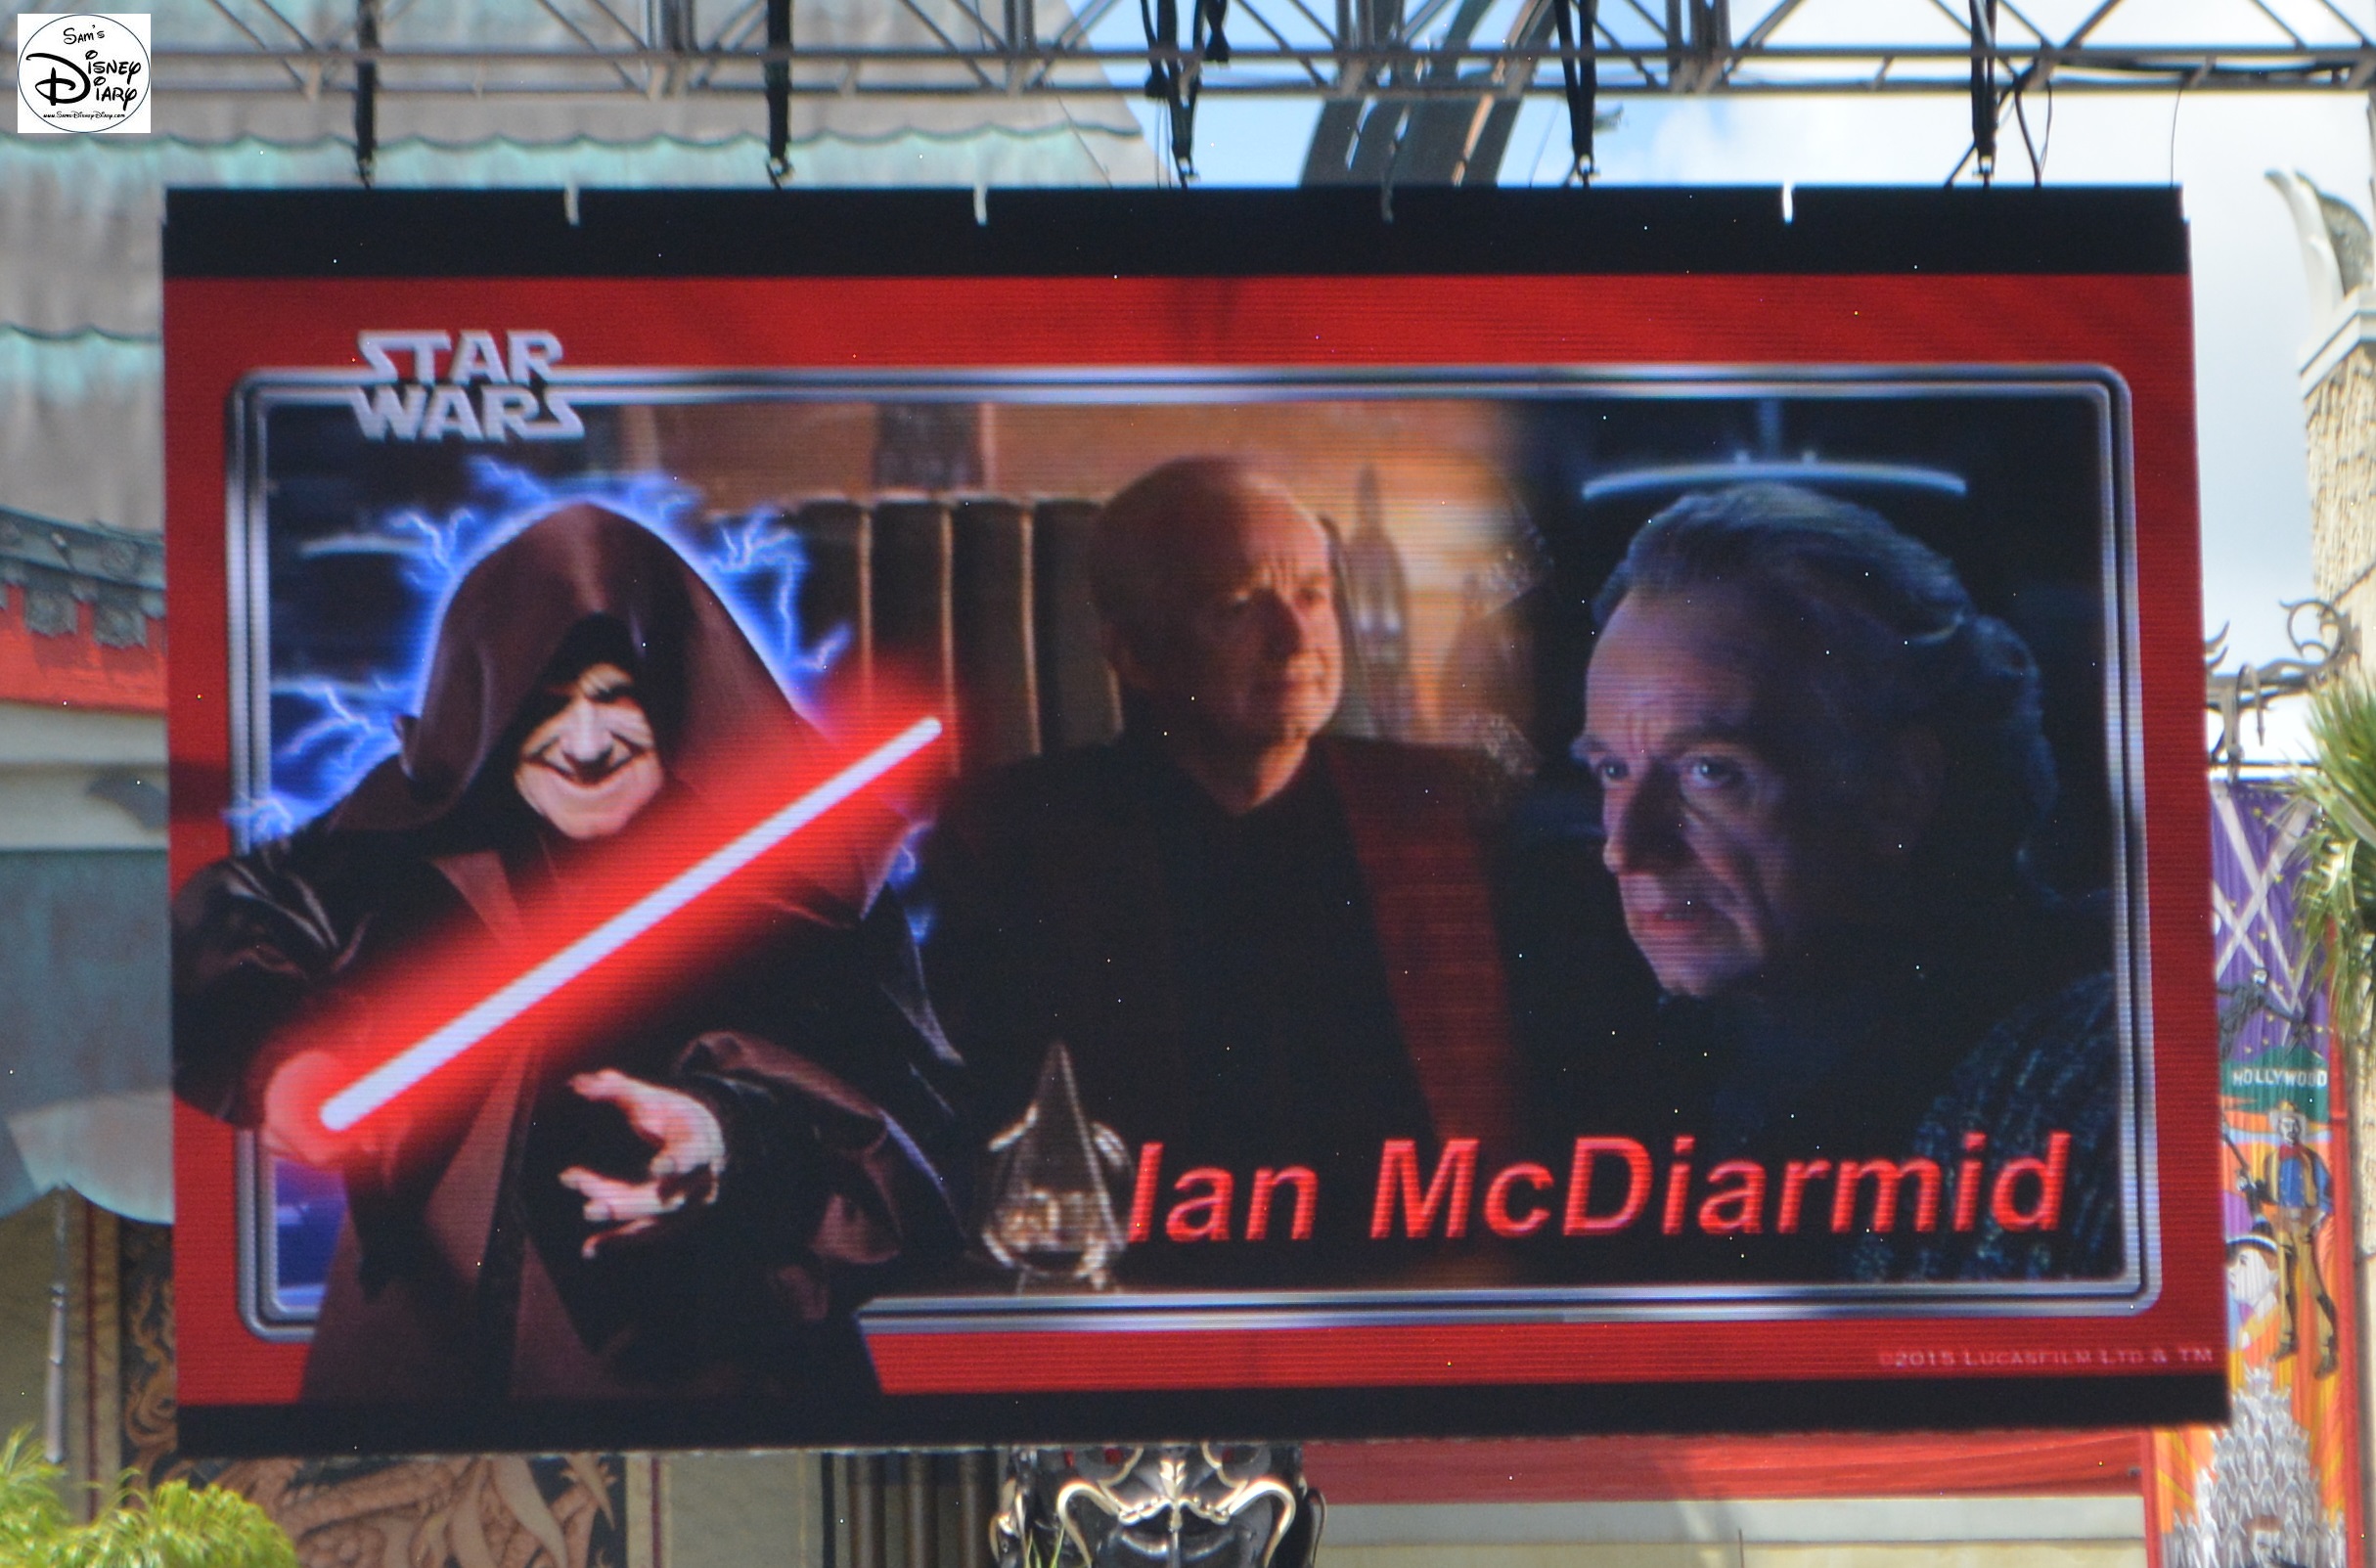 #SWW2015 weekend 1 features Ian McDiarmid, also know as the Emperor